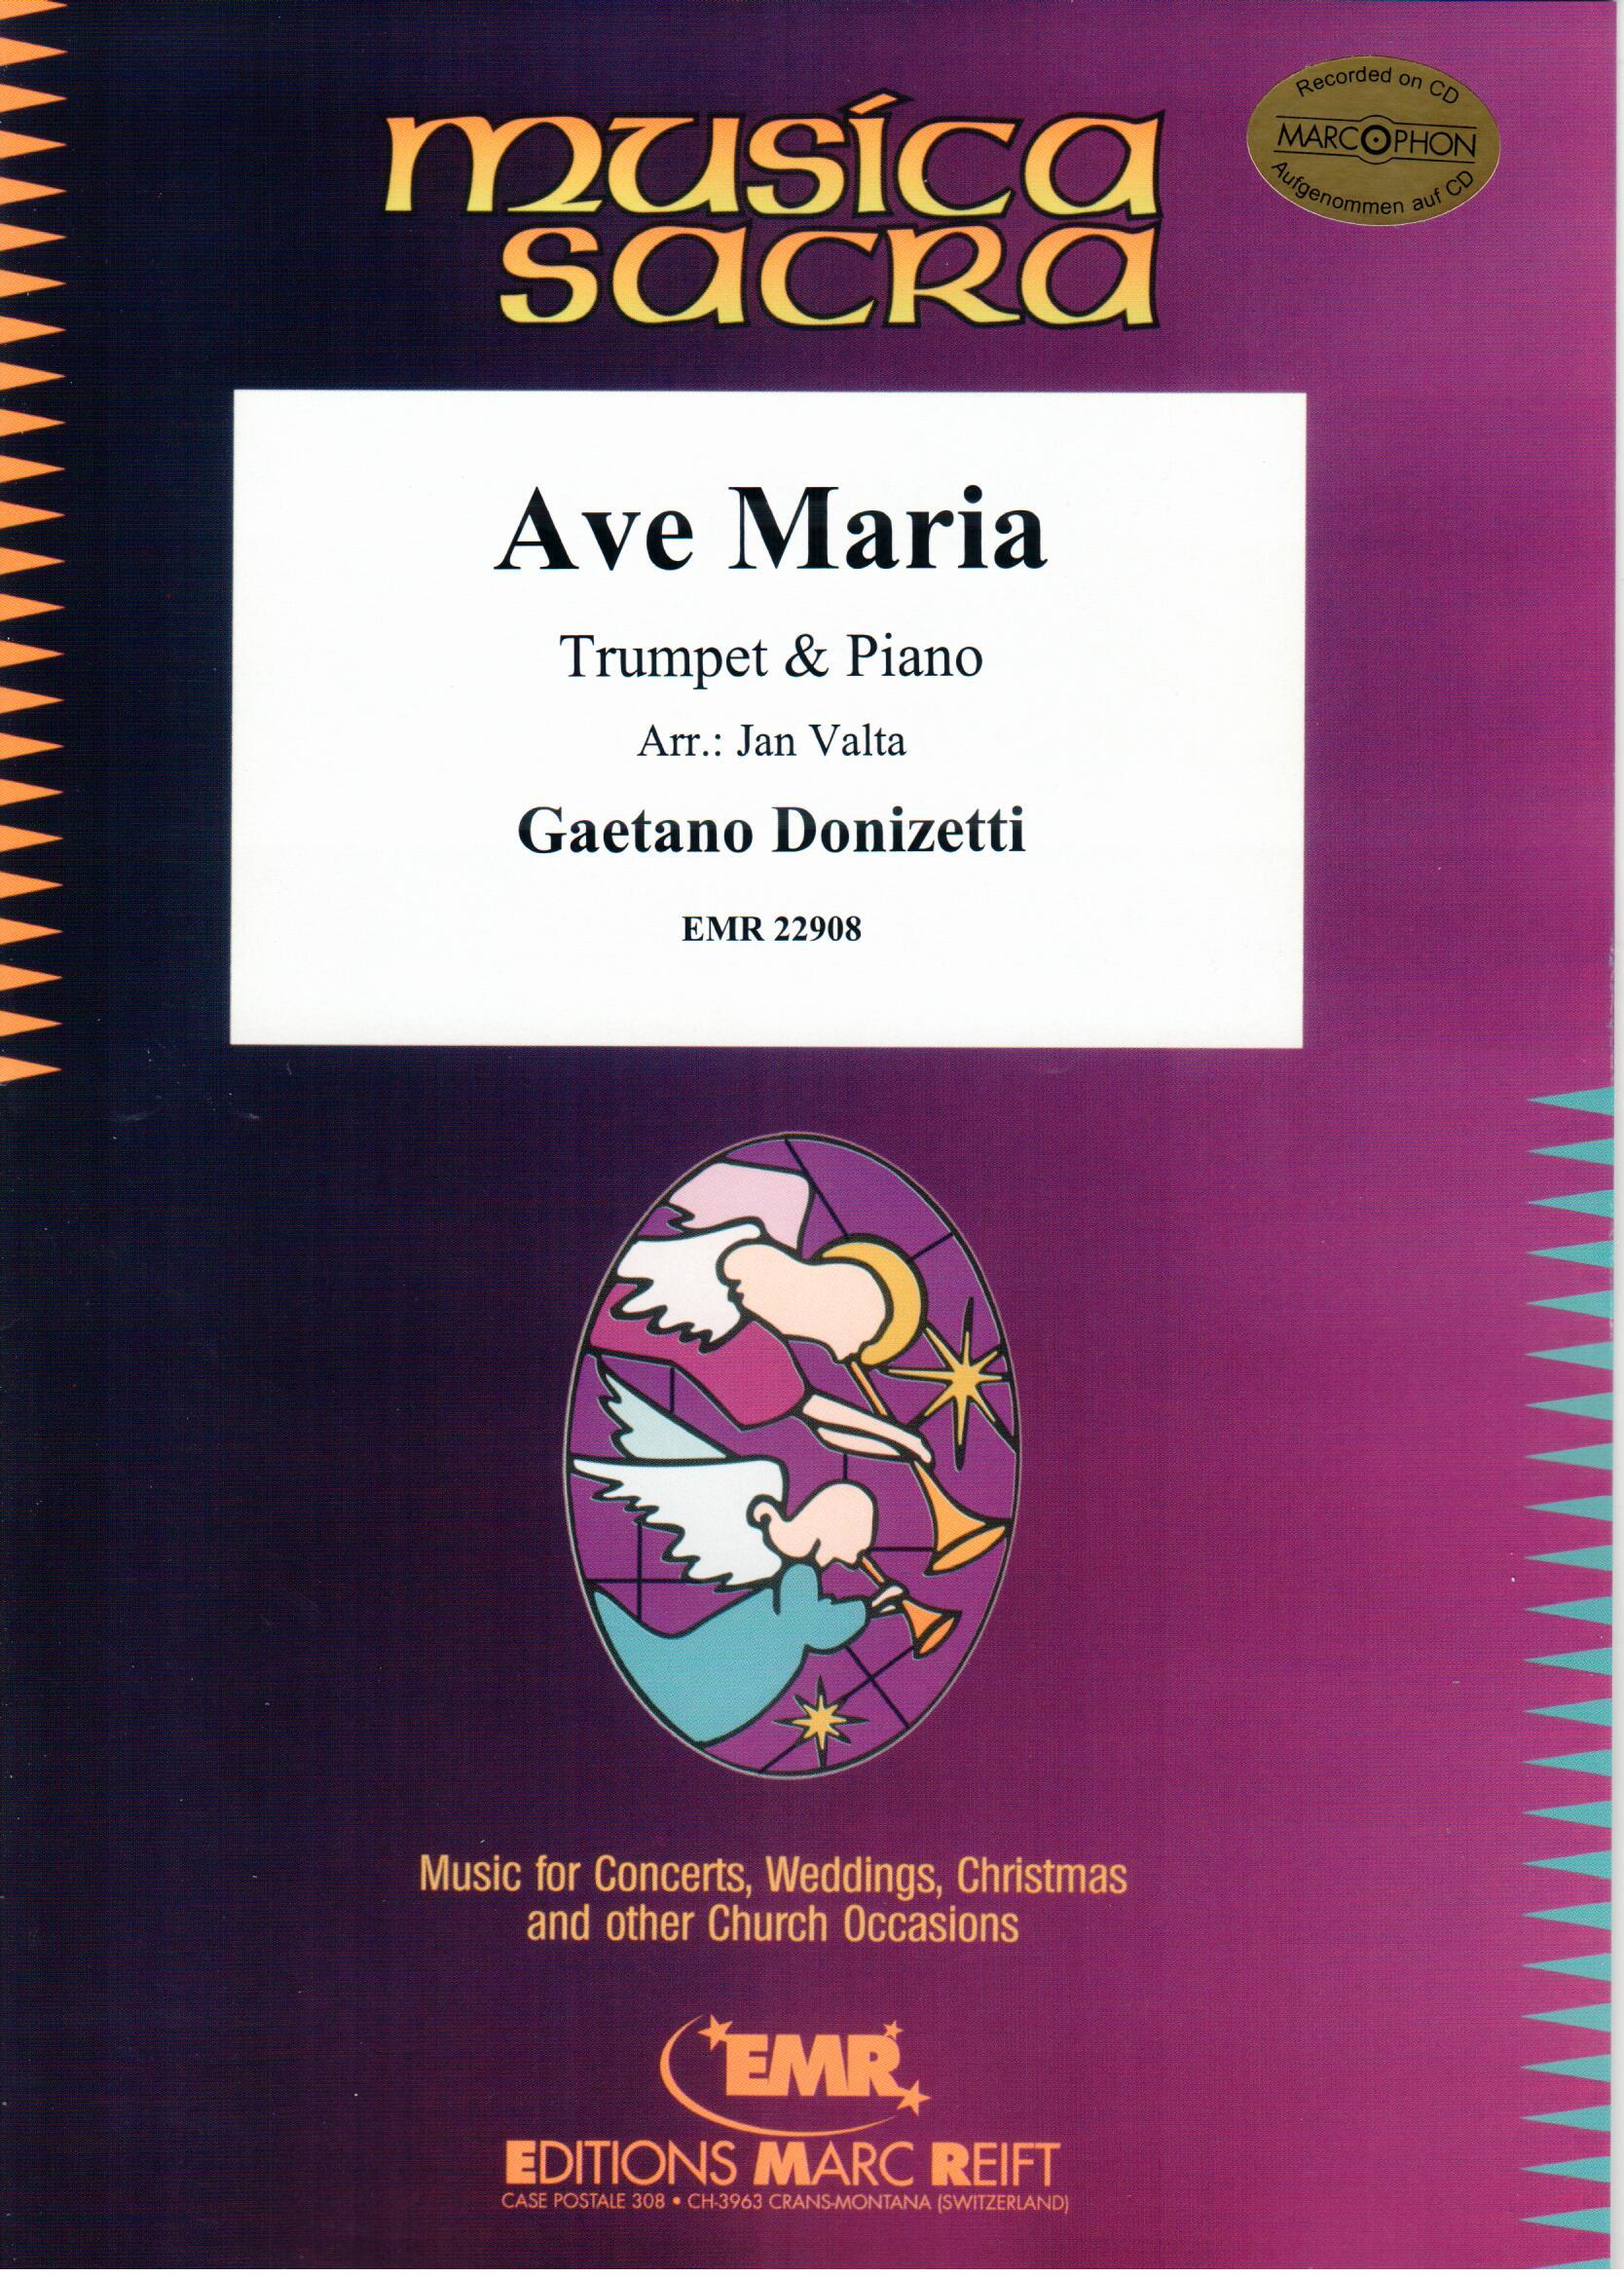 AVE MARIA, SOLOS - B♭. Cornet/Trumpet with Piano